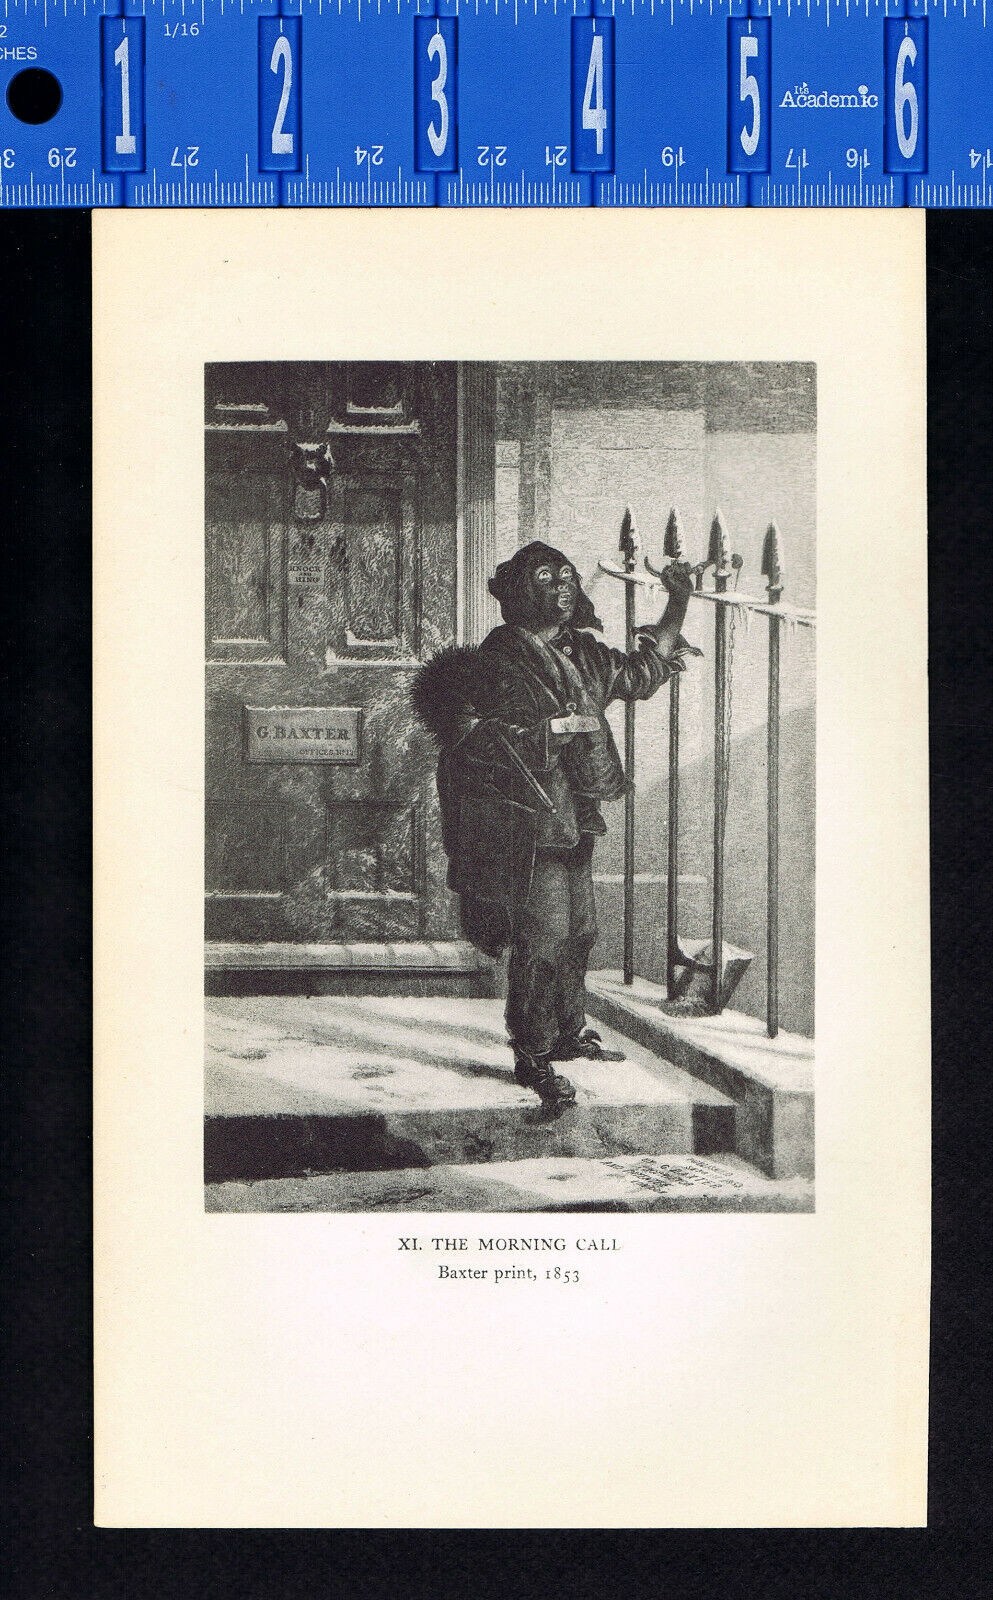 Boy Chimney Sweeper, The Morning Call, c1853 - 1937 Print